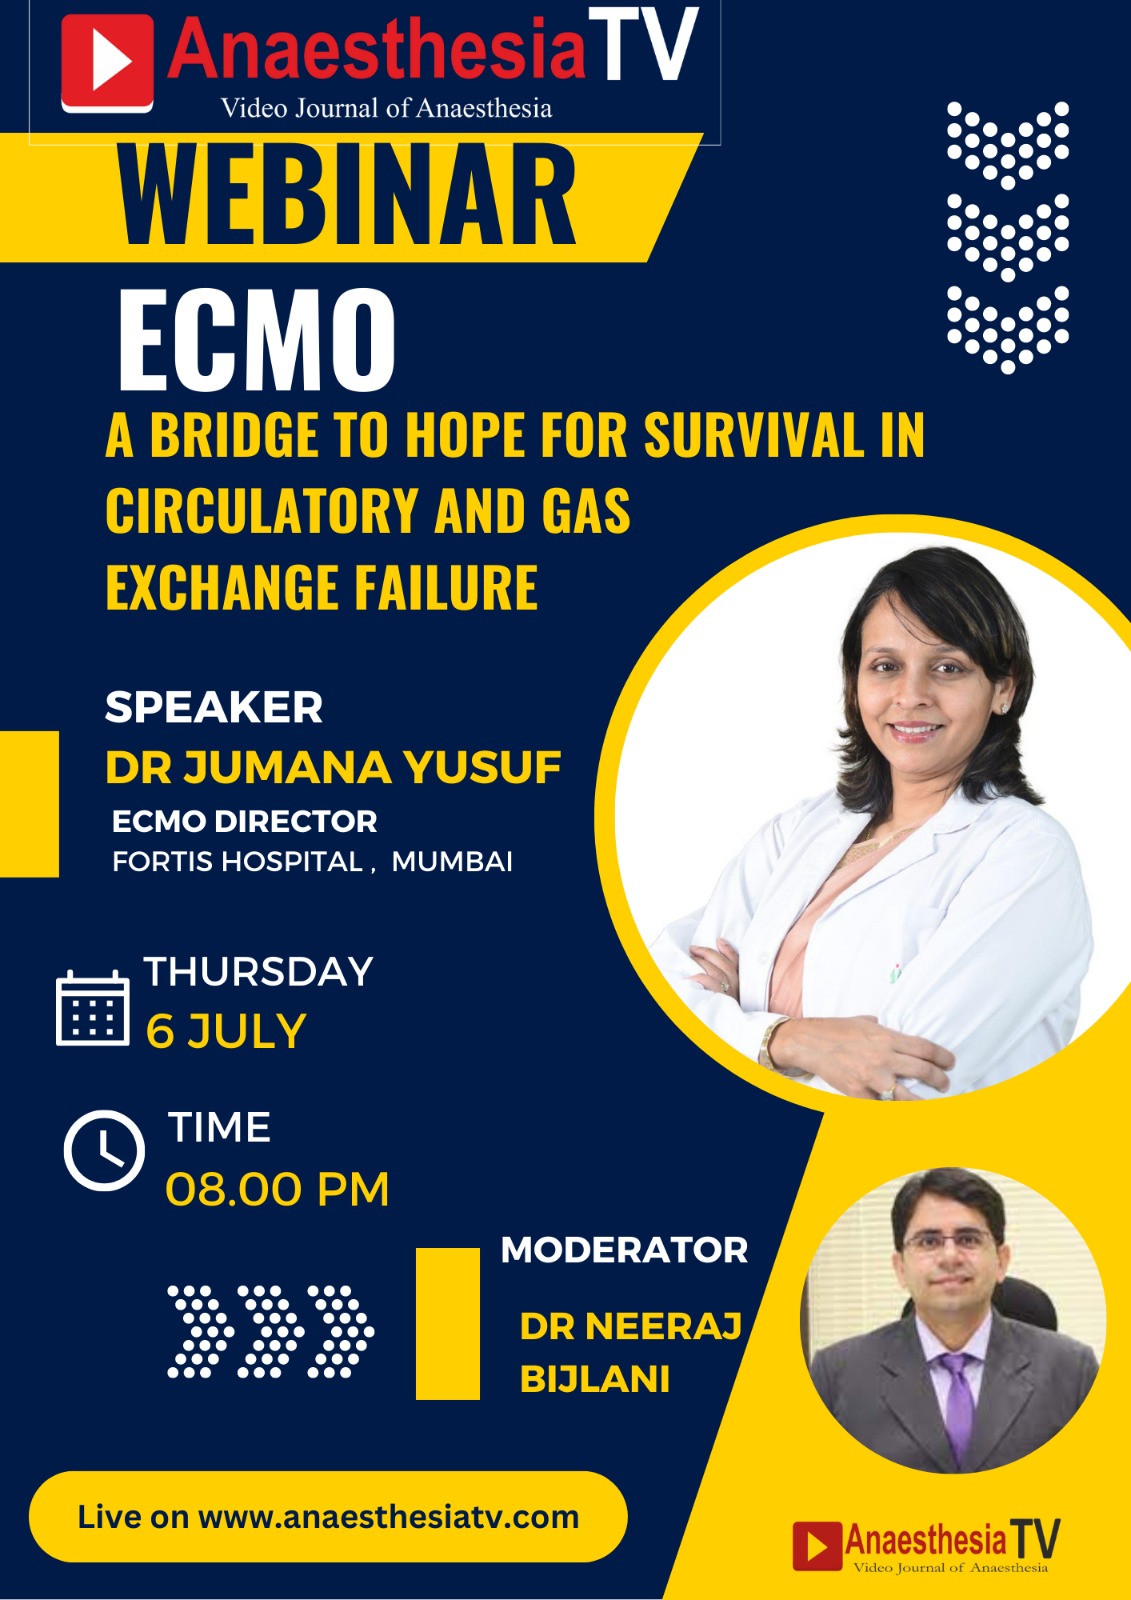 ECMO – a bridge to hope for survival in circulatory and gas exchange failure